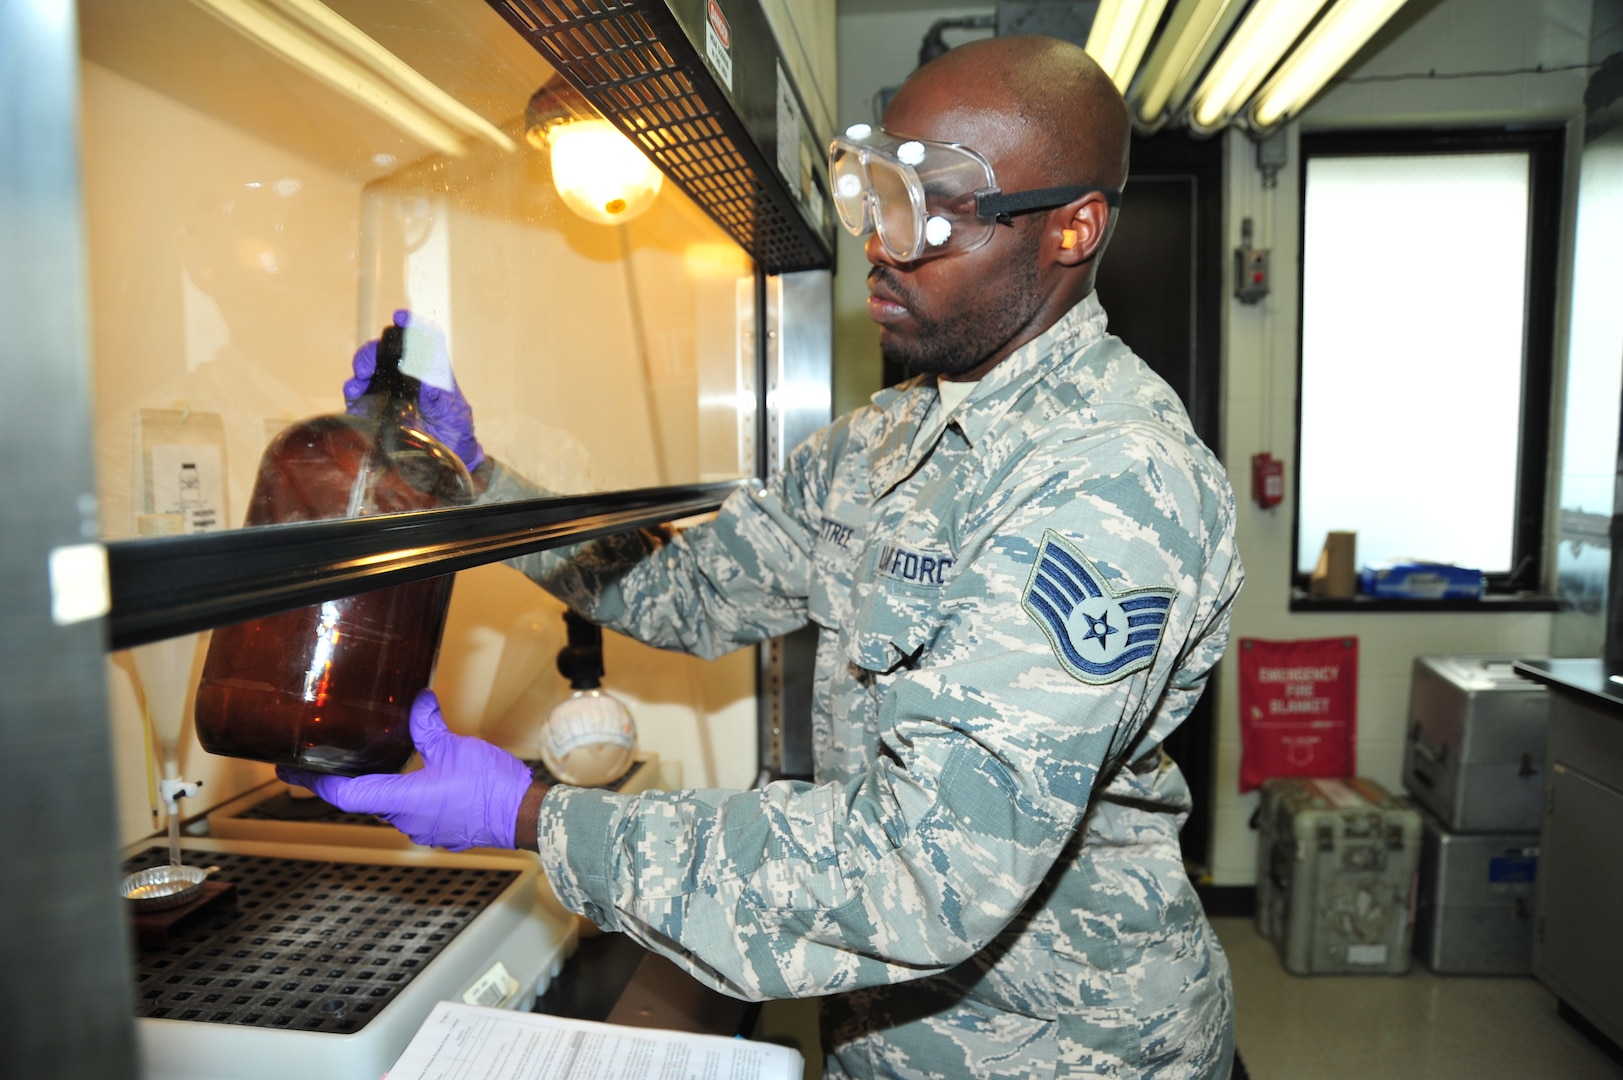 Fuel specialists of the 403rd Mission Support Group at Keesler Air Force Base put their science based training into action every day as they supply petroleum products to the 403rd Wing C-130Js, weapons systems, and ground vehicles.